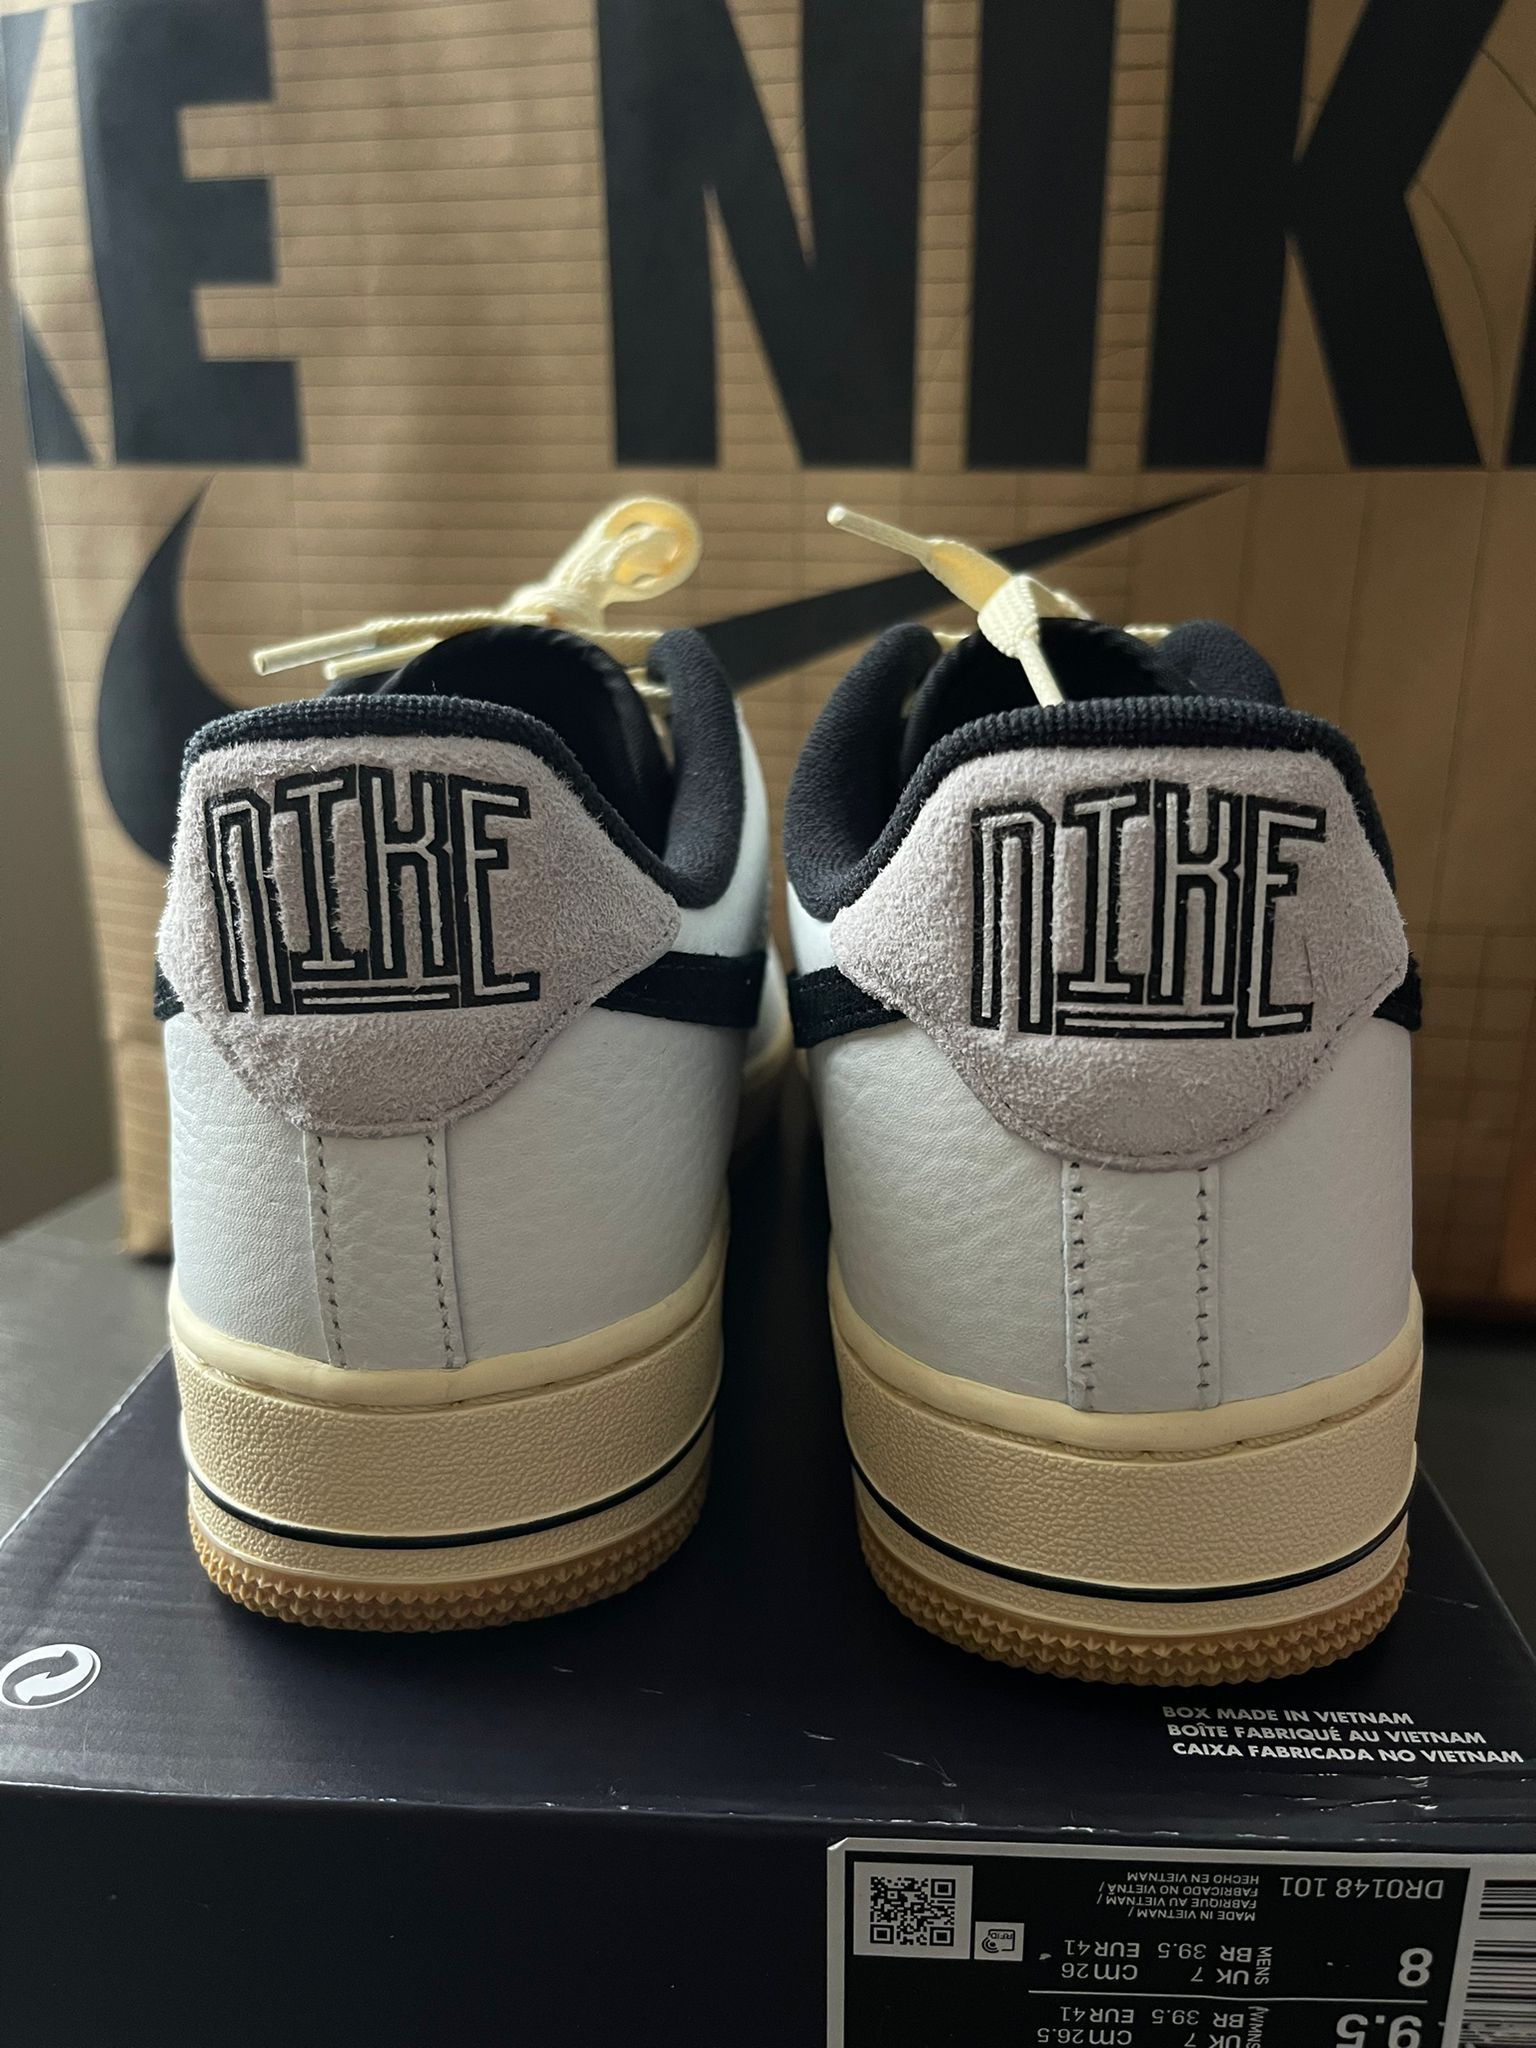 NIKE AIR FORCE 1 '07 LV 8LT SZ 6.5 for Sale in Miami, FL - OfferUp